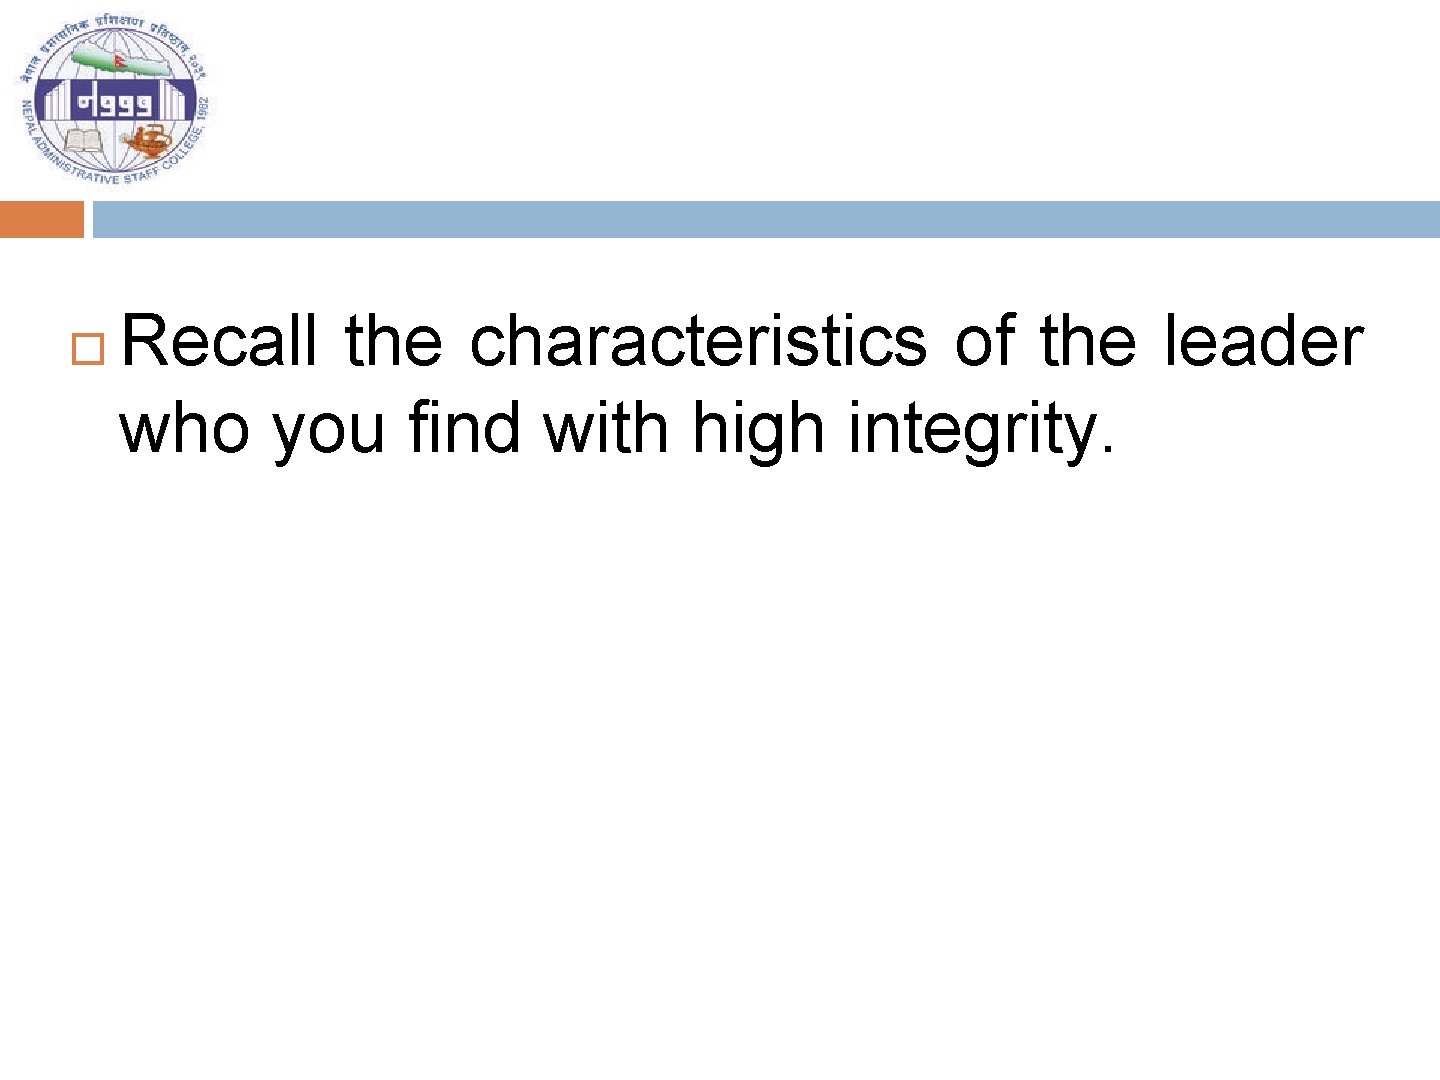  Recall the characteristics of the leader who you find with high integrity. 